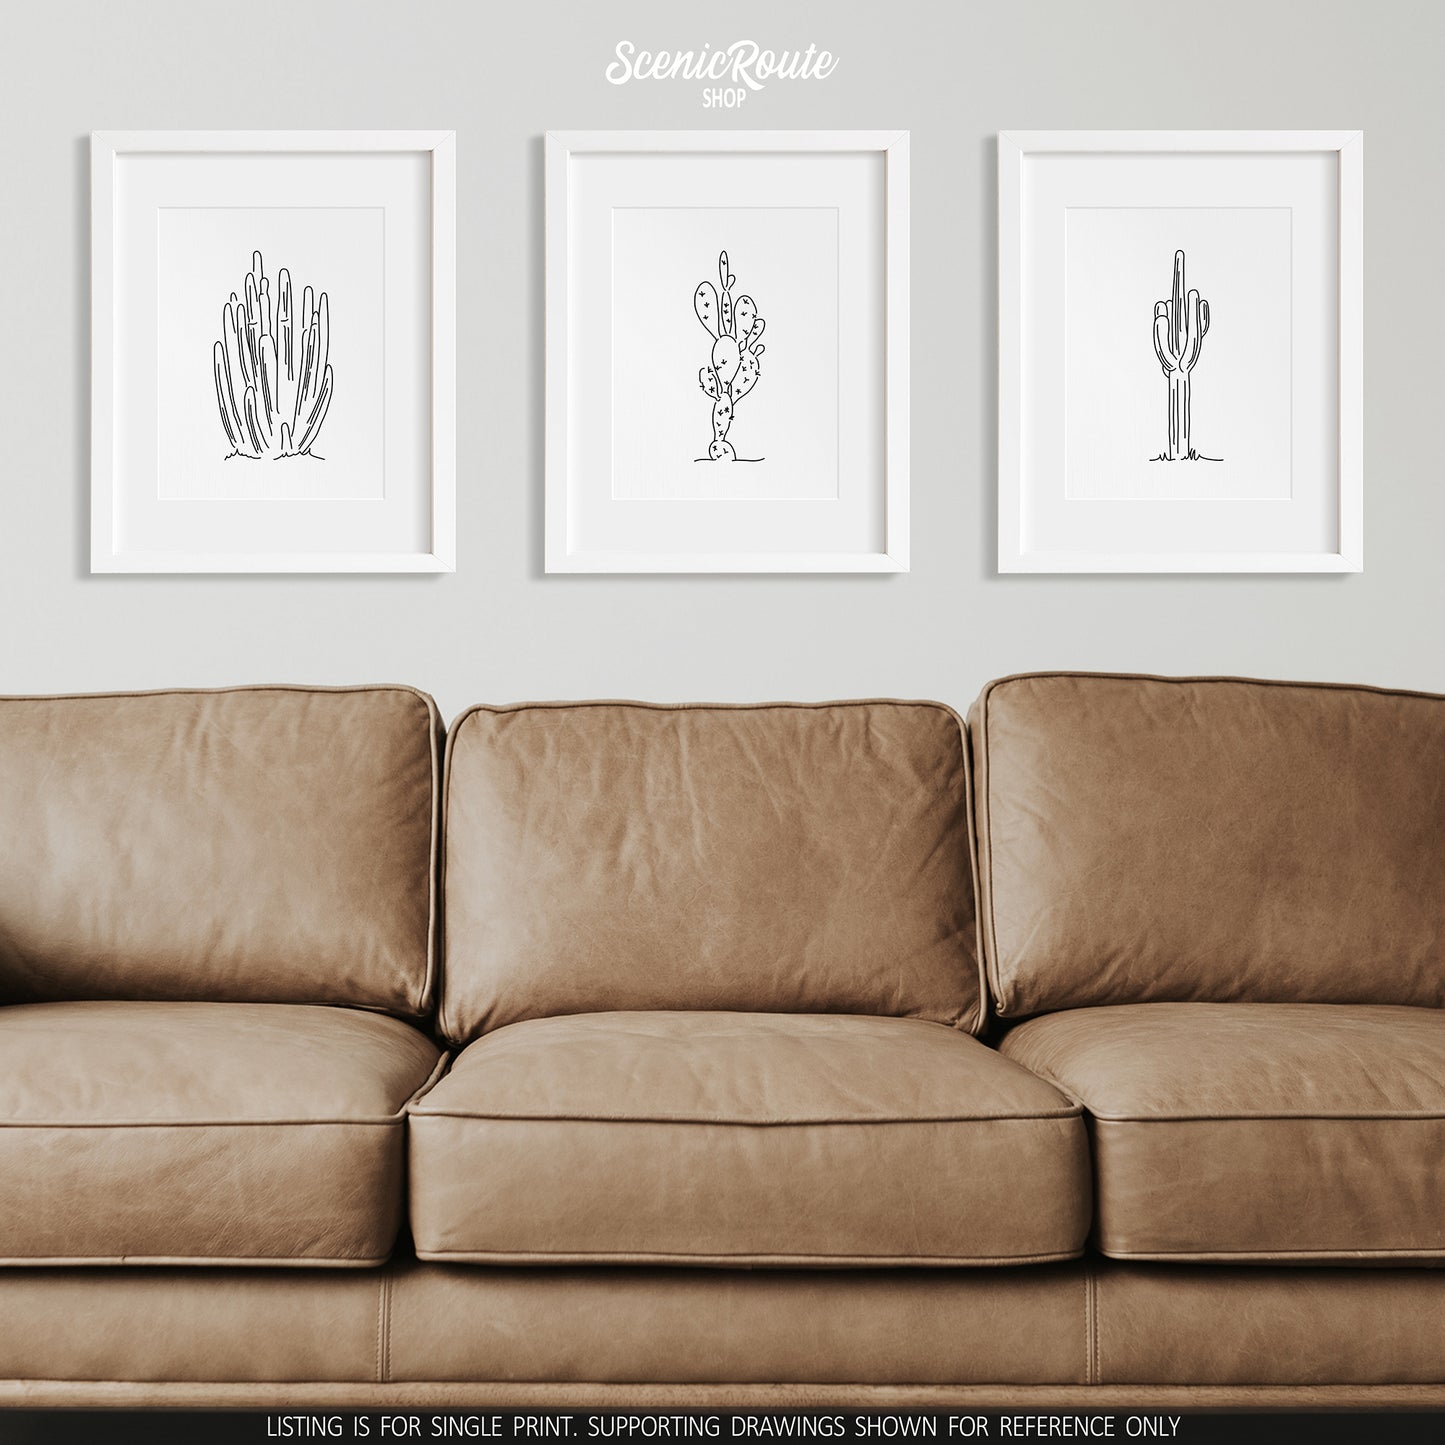 A group of three framed drawings on a wall above a couch. The line art drawings include an Organ Pipe Cactus, Prickly Pear Cactus, and Saguaro Cactus